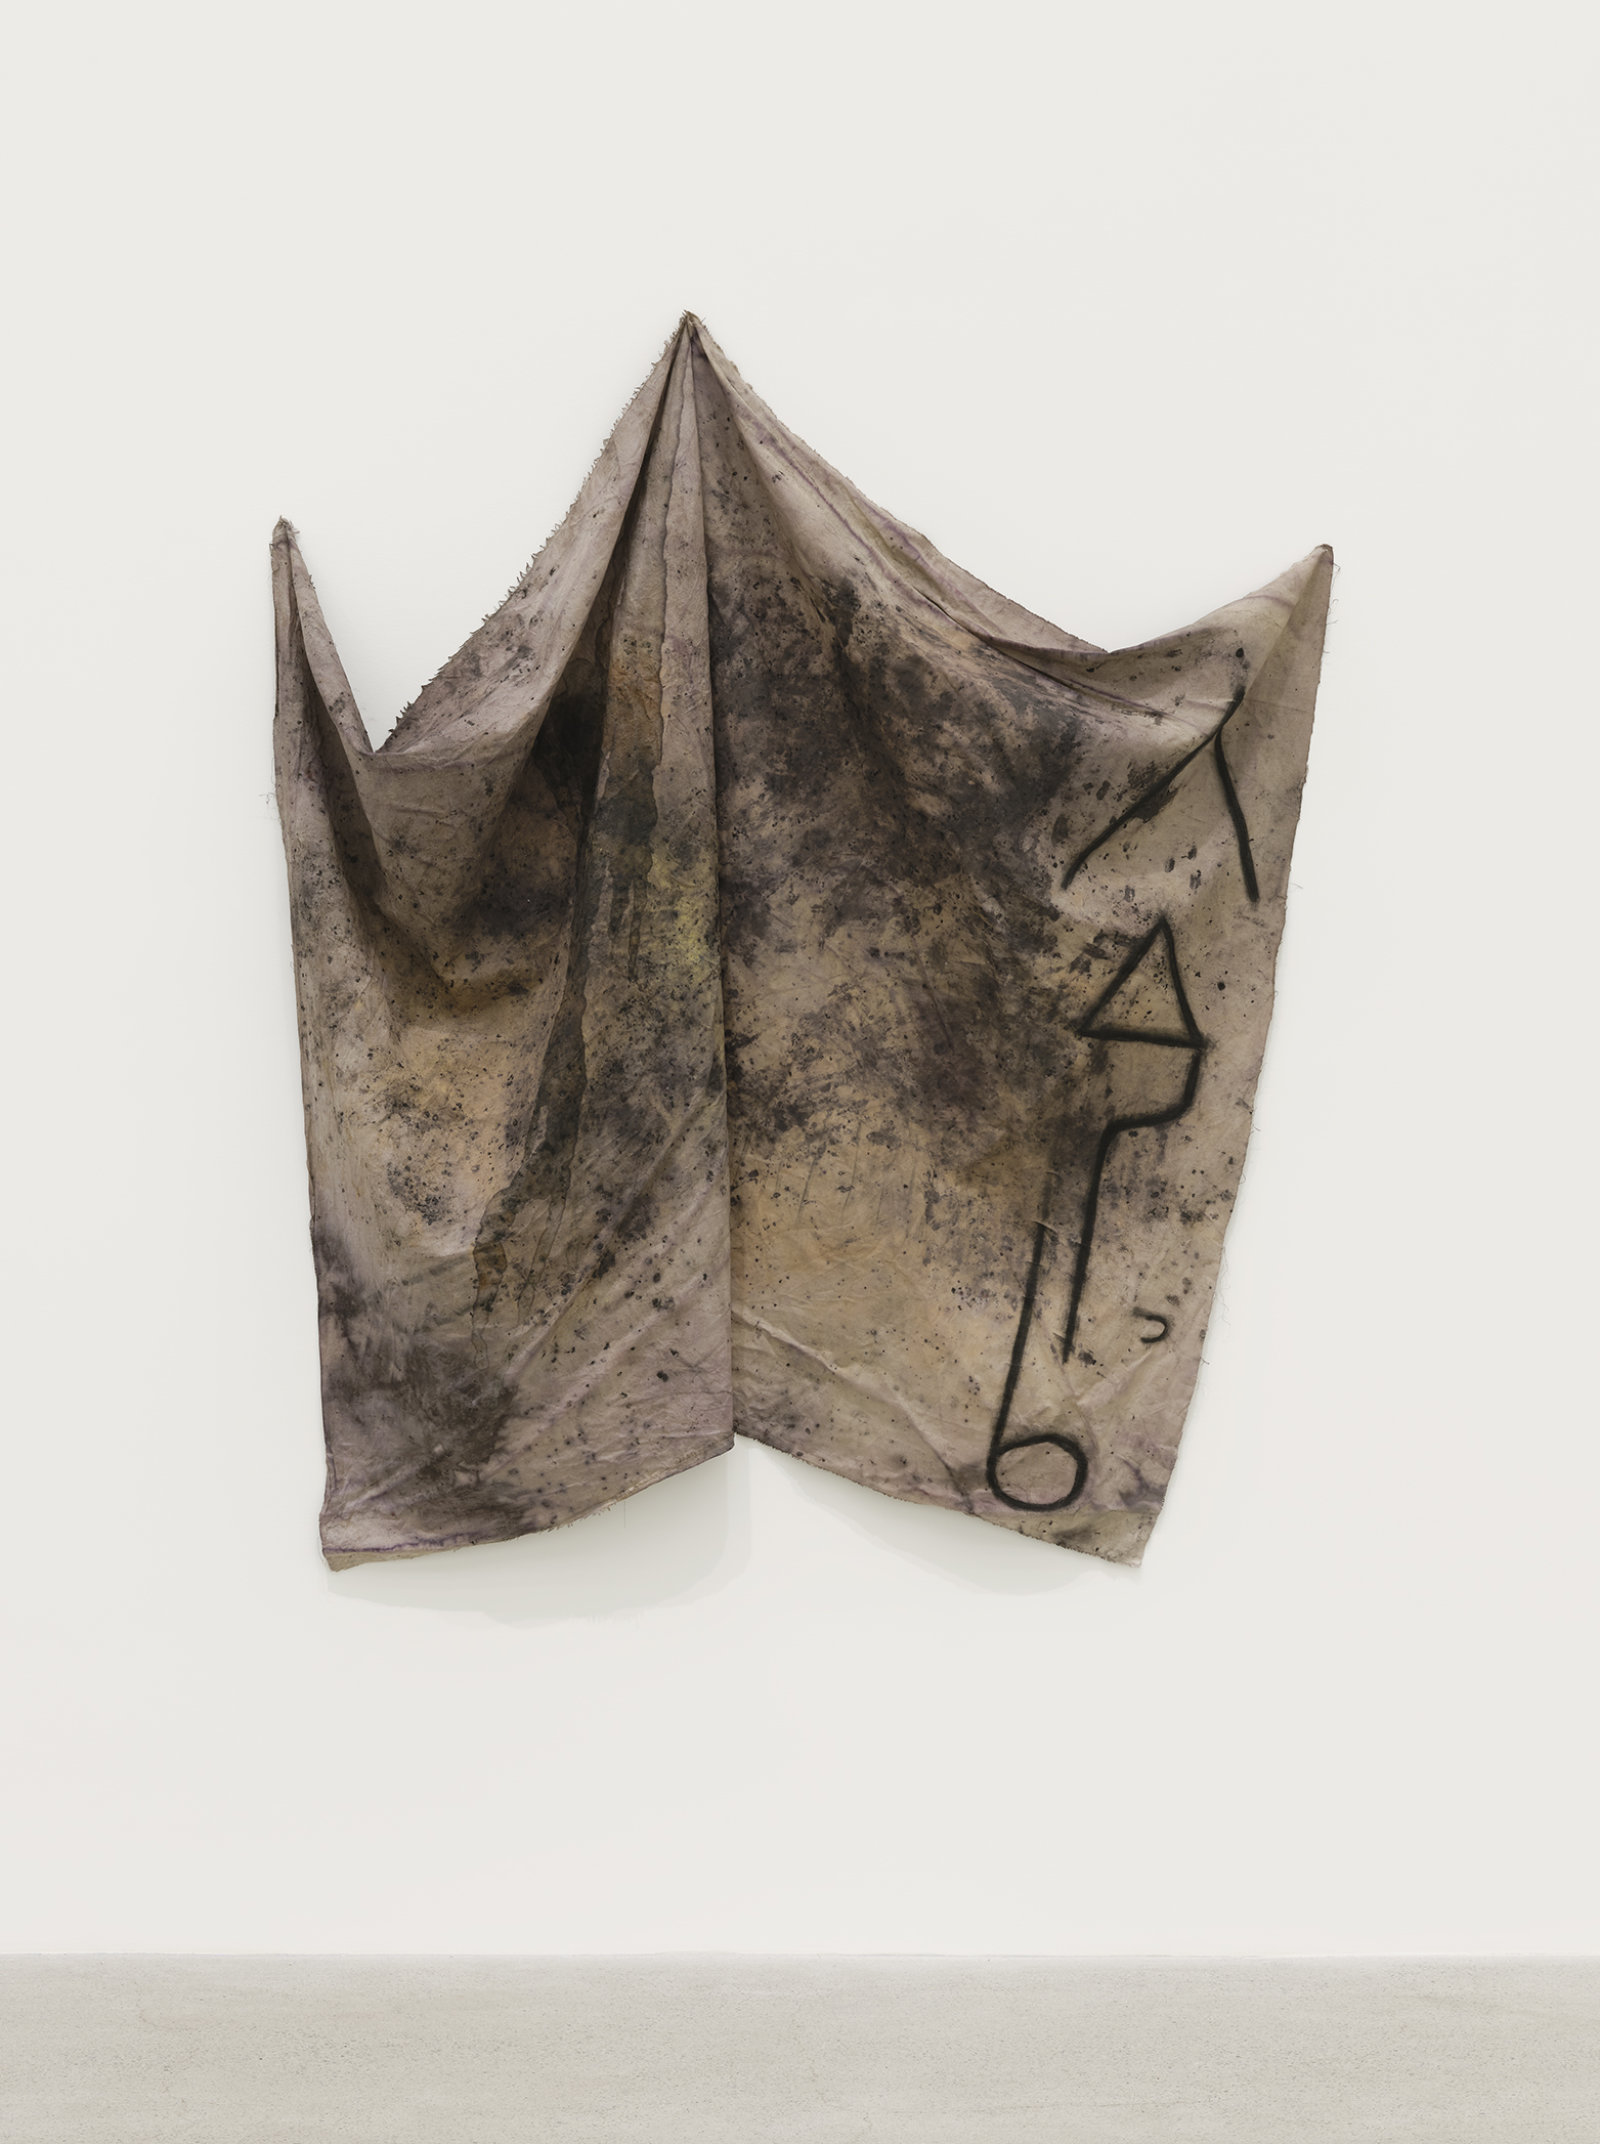 Duane Linklater, crust cloth remnant, 2021, linen, cochineal dye, yellow ochre, honey, charcoal, nails, 66 x 56 x 7 in. (168 x 141 x 18 cm)